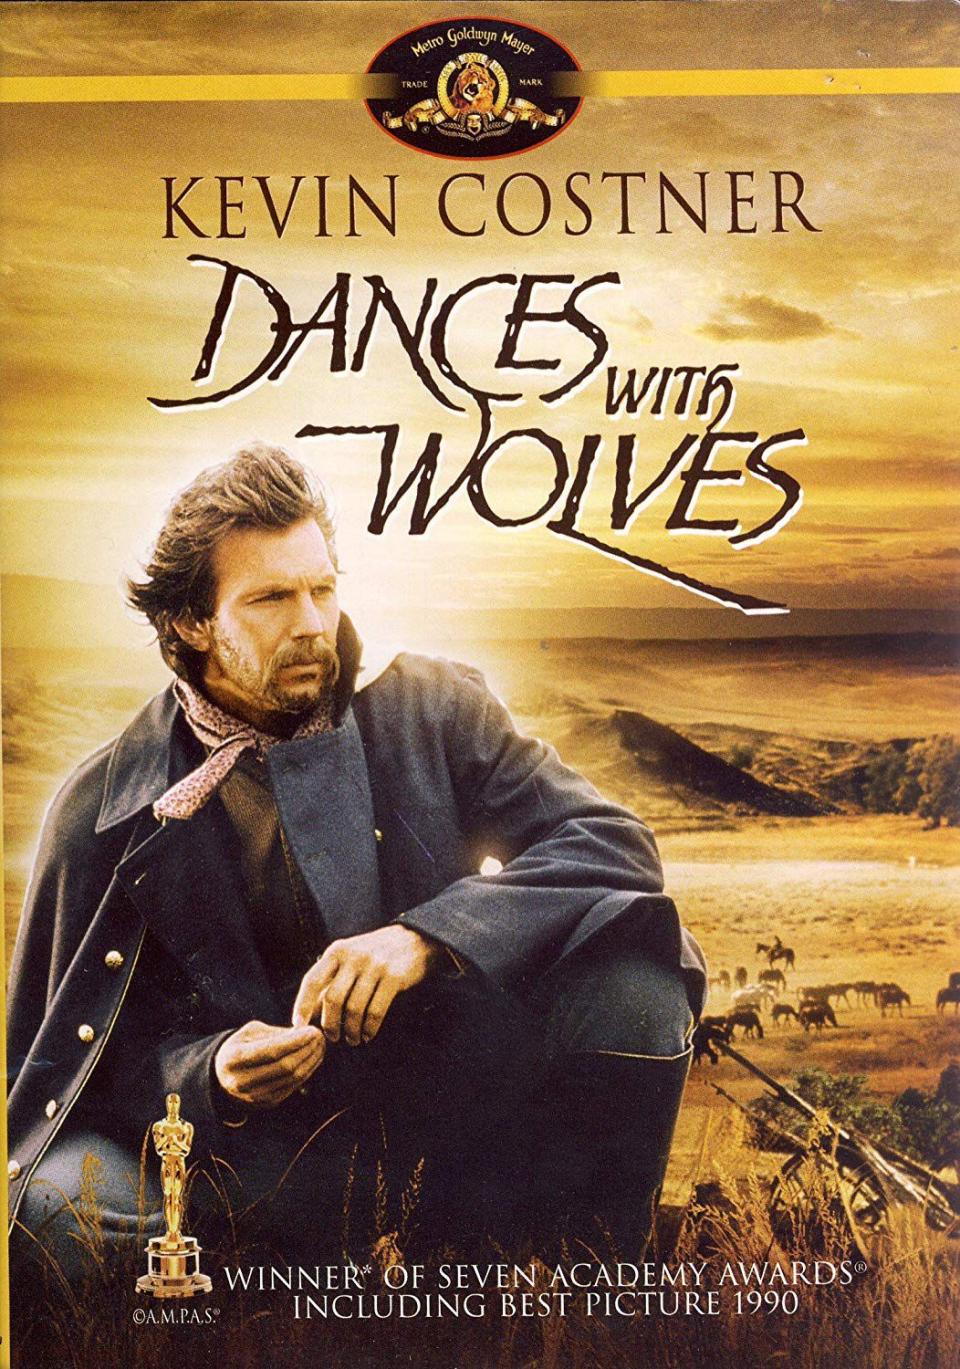 Dances with Wolves (1991)